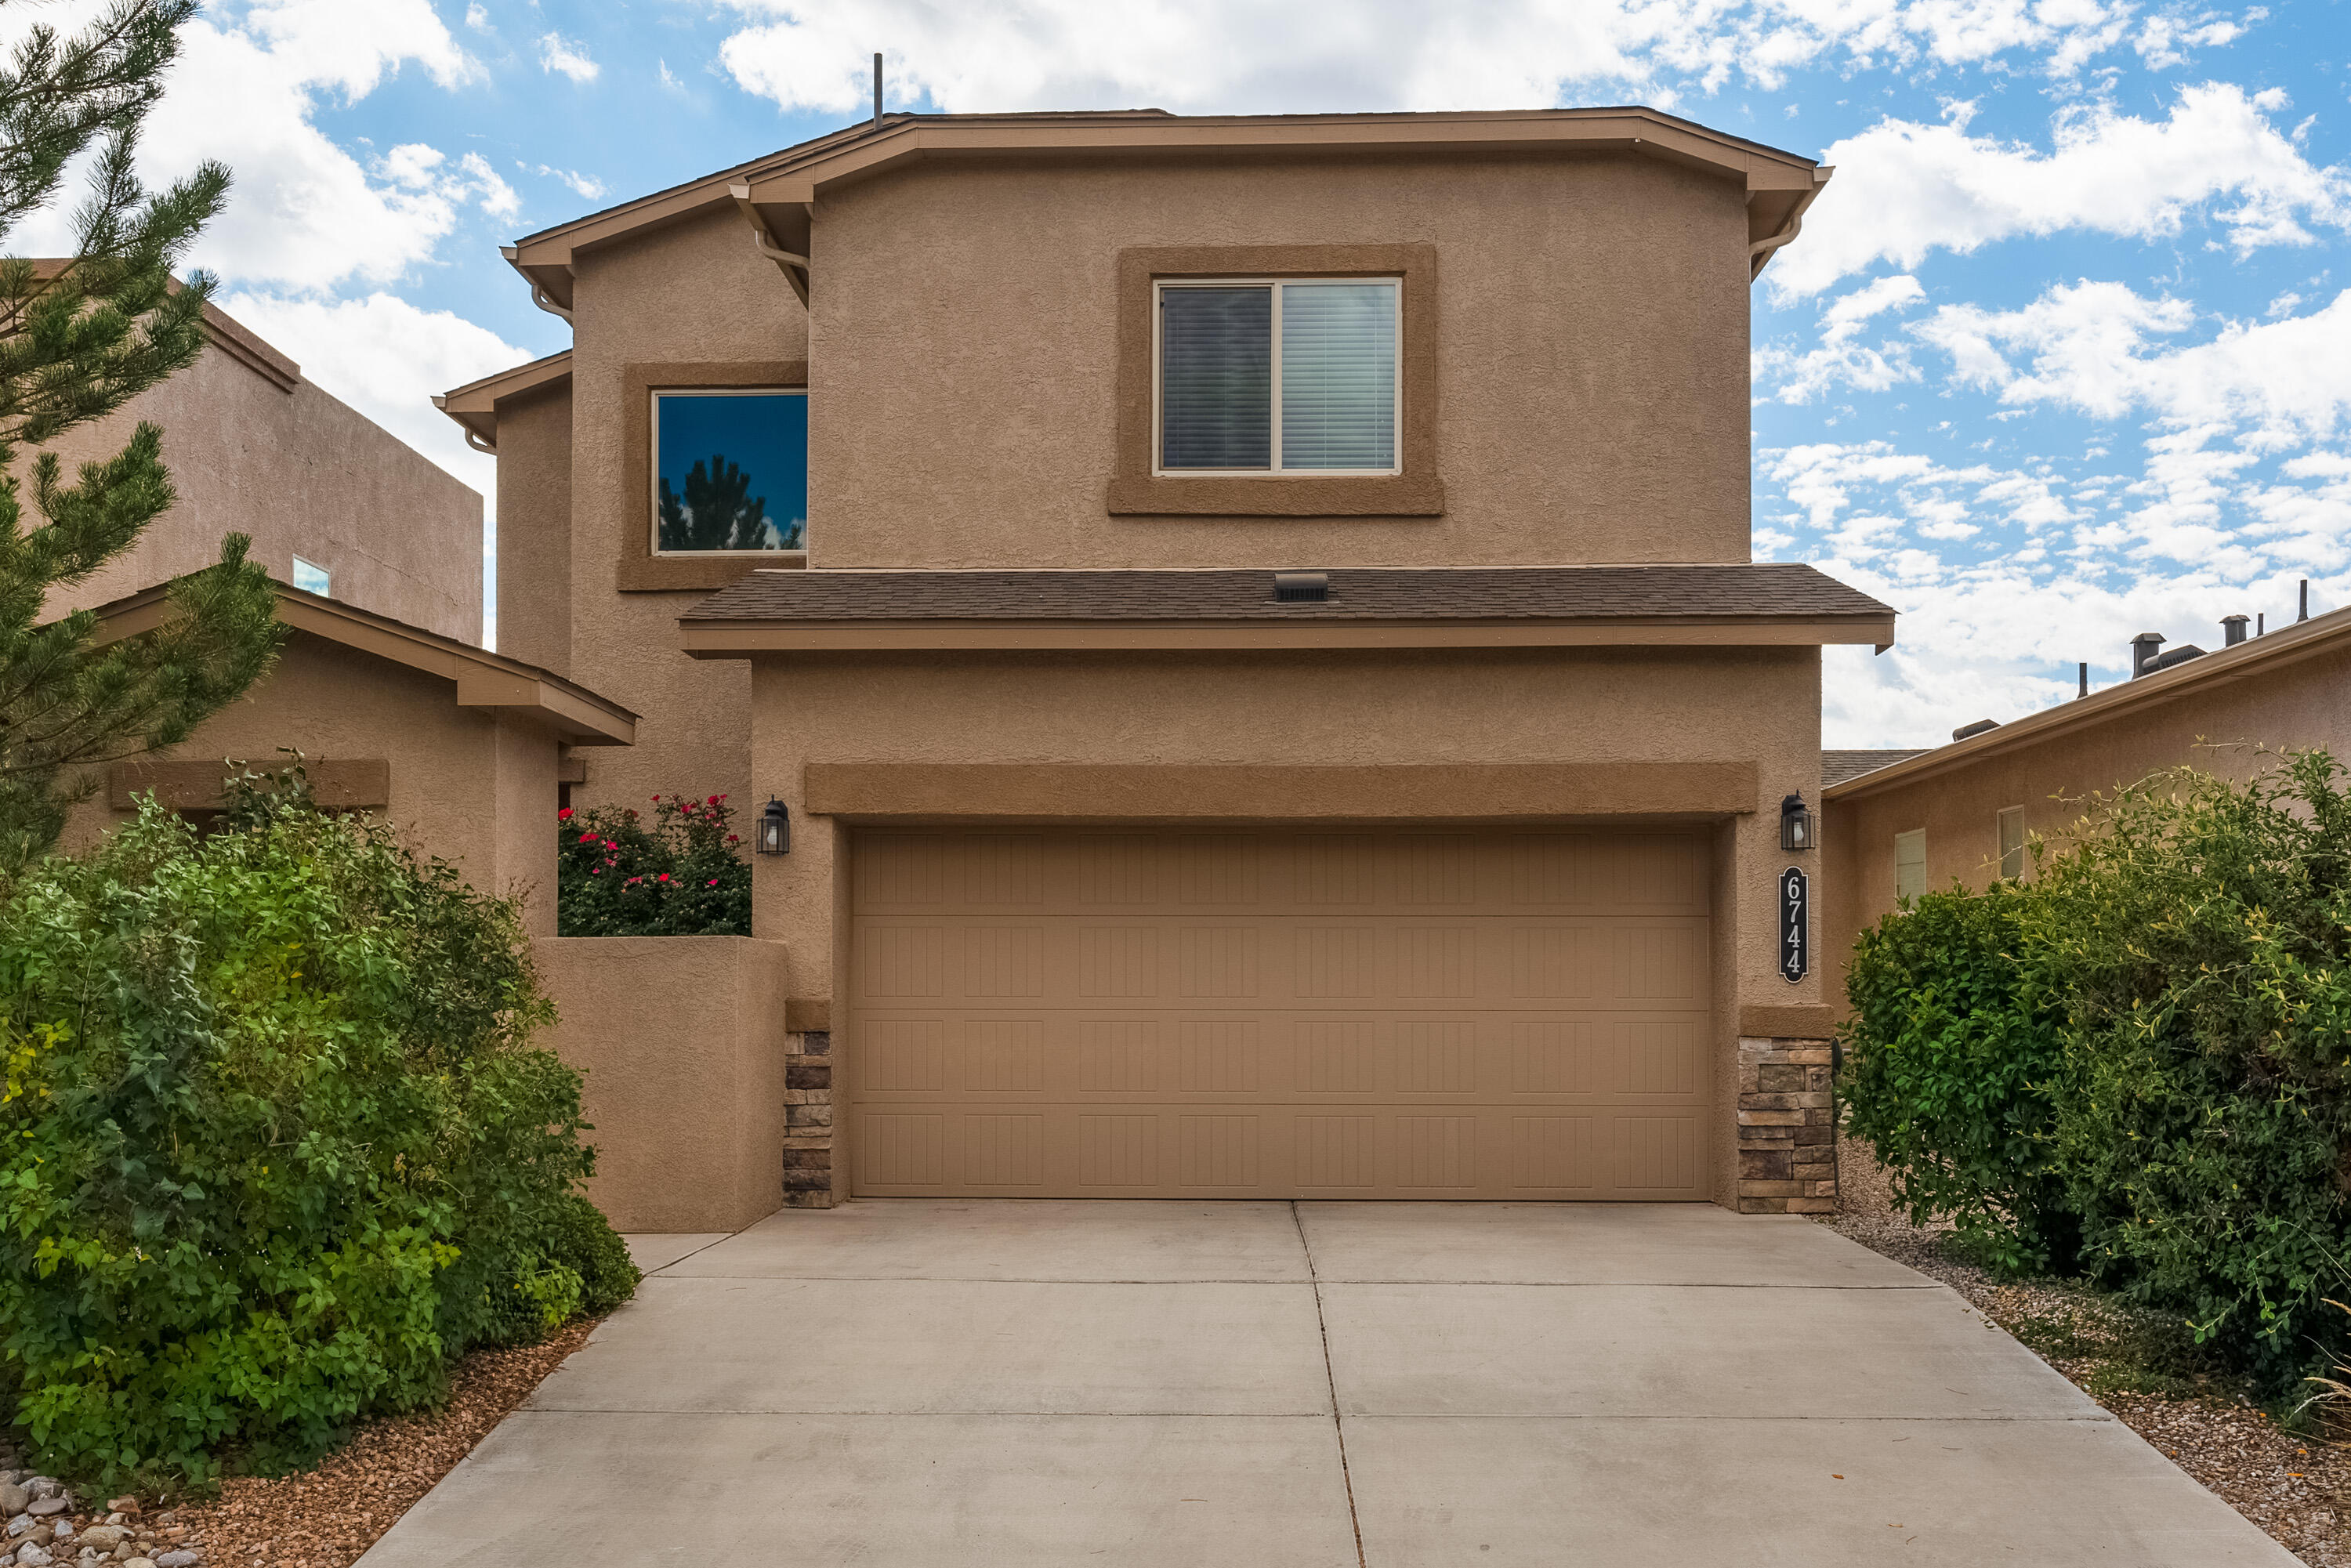 Beautiful 2 story home located in The Trails neighborhood. Easy access to Paseo Del Norte for any commute. All bedrooms are located upstairs, along with a nice loft, and laundry room!Stunning rose bushes surround the entryway, come check it out!